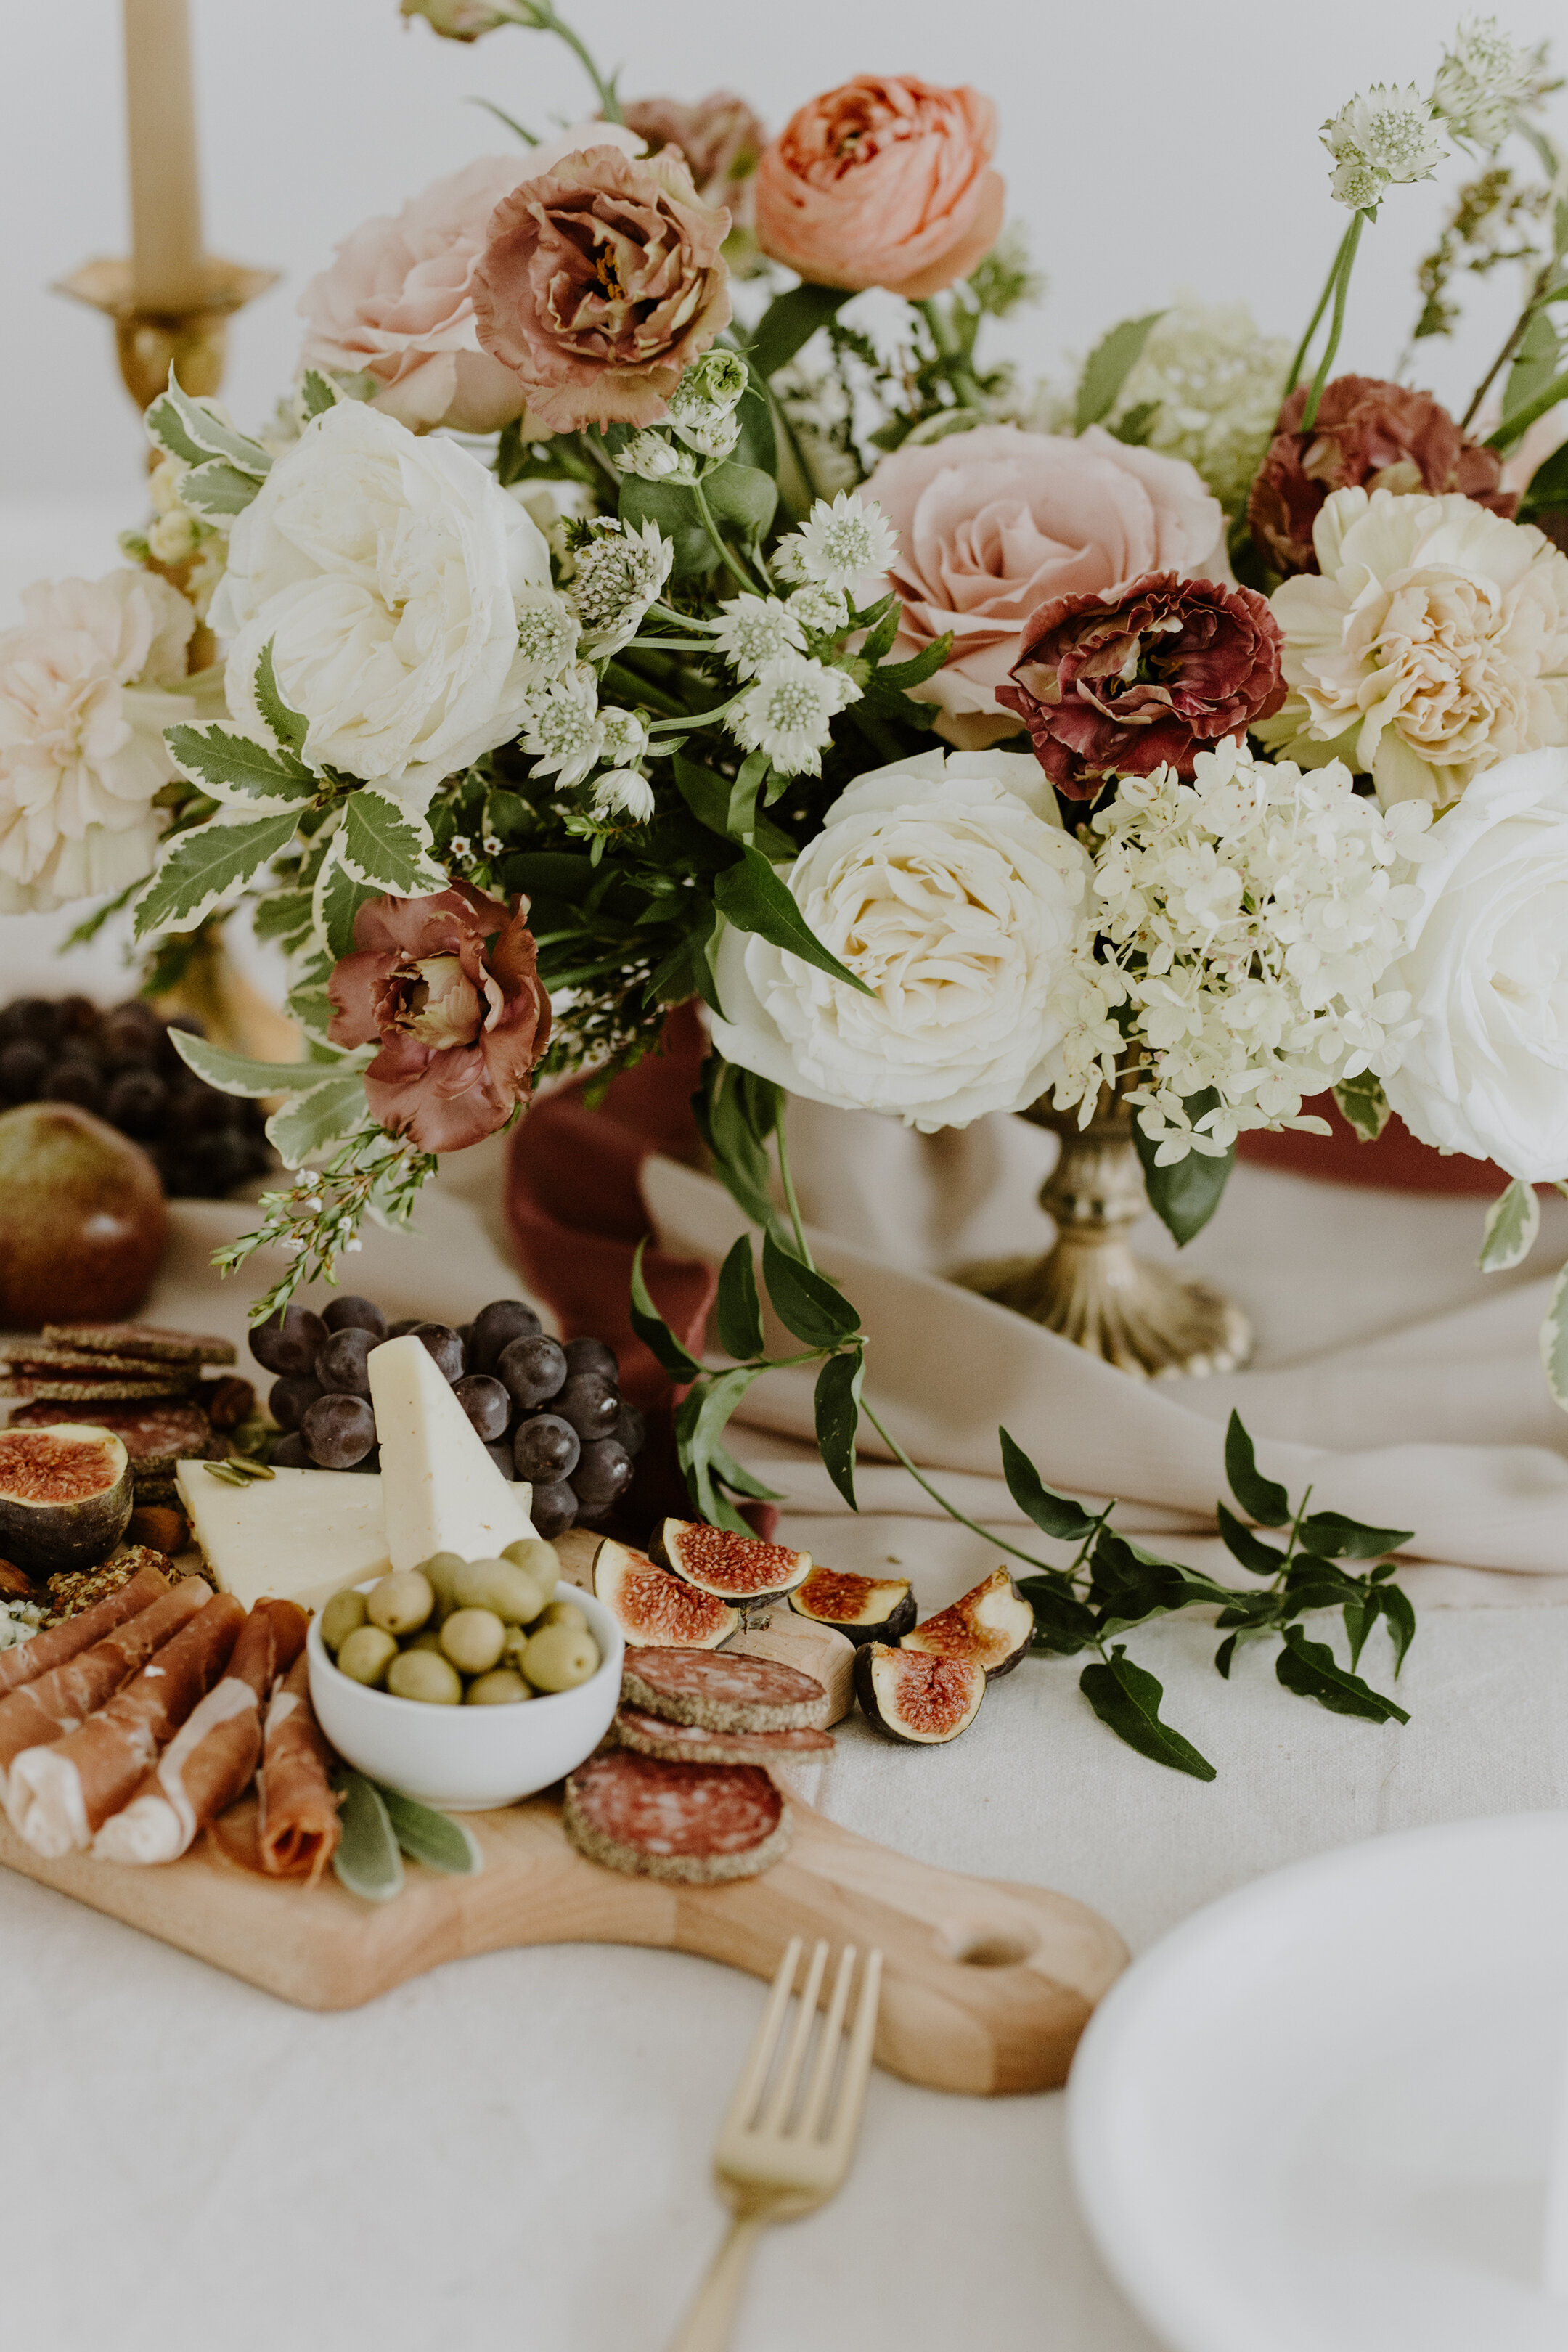 Old-World Romantic Styling Meets Warm Family-Style Gathering // Inspiration Shoot at Spruce Meadows